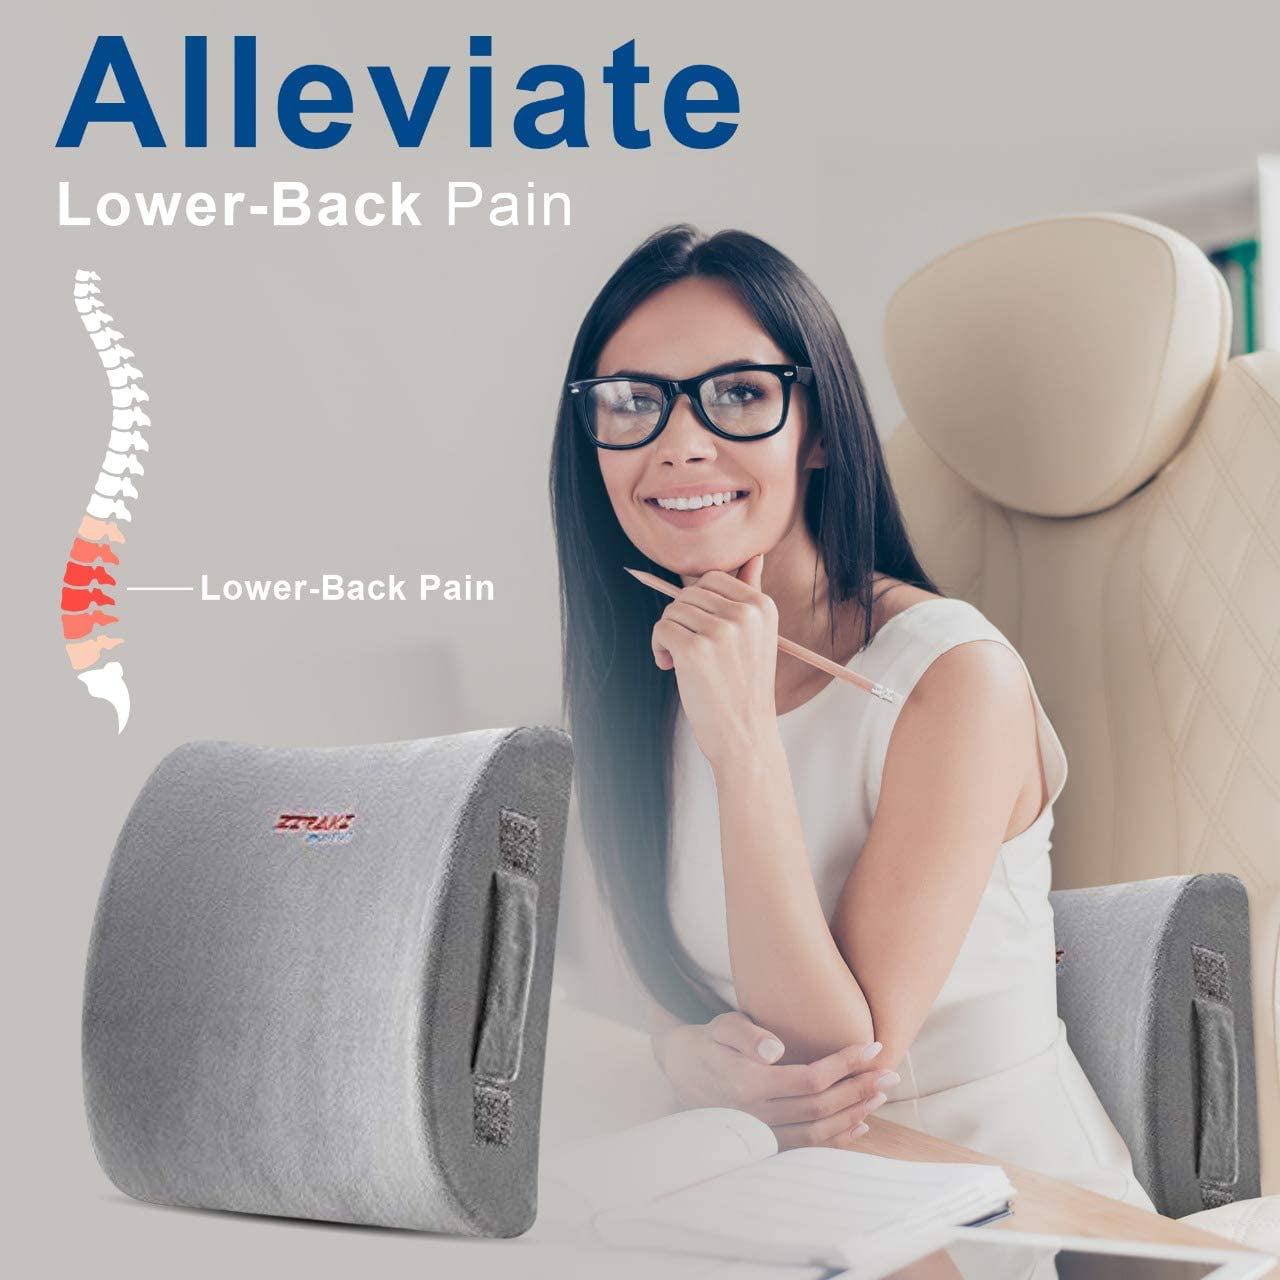 Lumbar Pillow Back Pain Support - Seat Cushion for Car or Office Chair  Memory Foam, Lower Back Pain Relief, Improve Your Posture, Protect & Soothe  Your Back